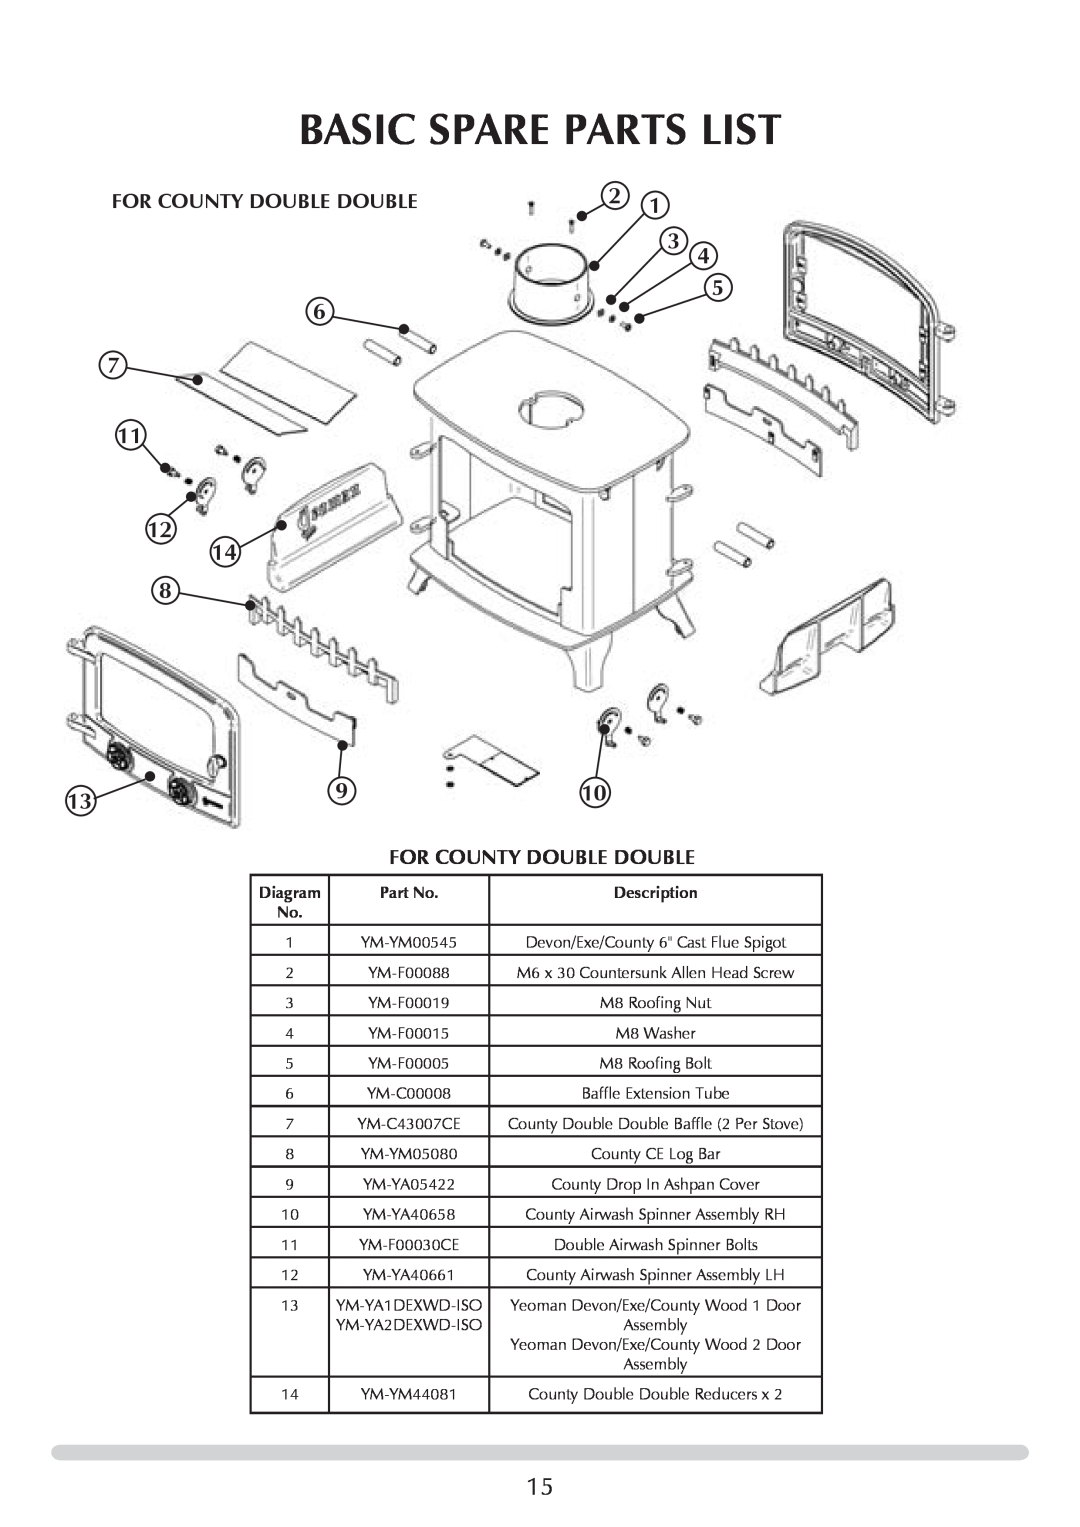 Yeoman YM-W9121FL, YM-W9122FL manual 3 5 6 7 11 12, For County DOUBLE double, Basic Spare Parts List, Diagram 